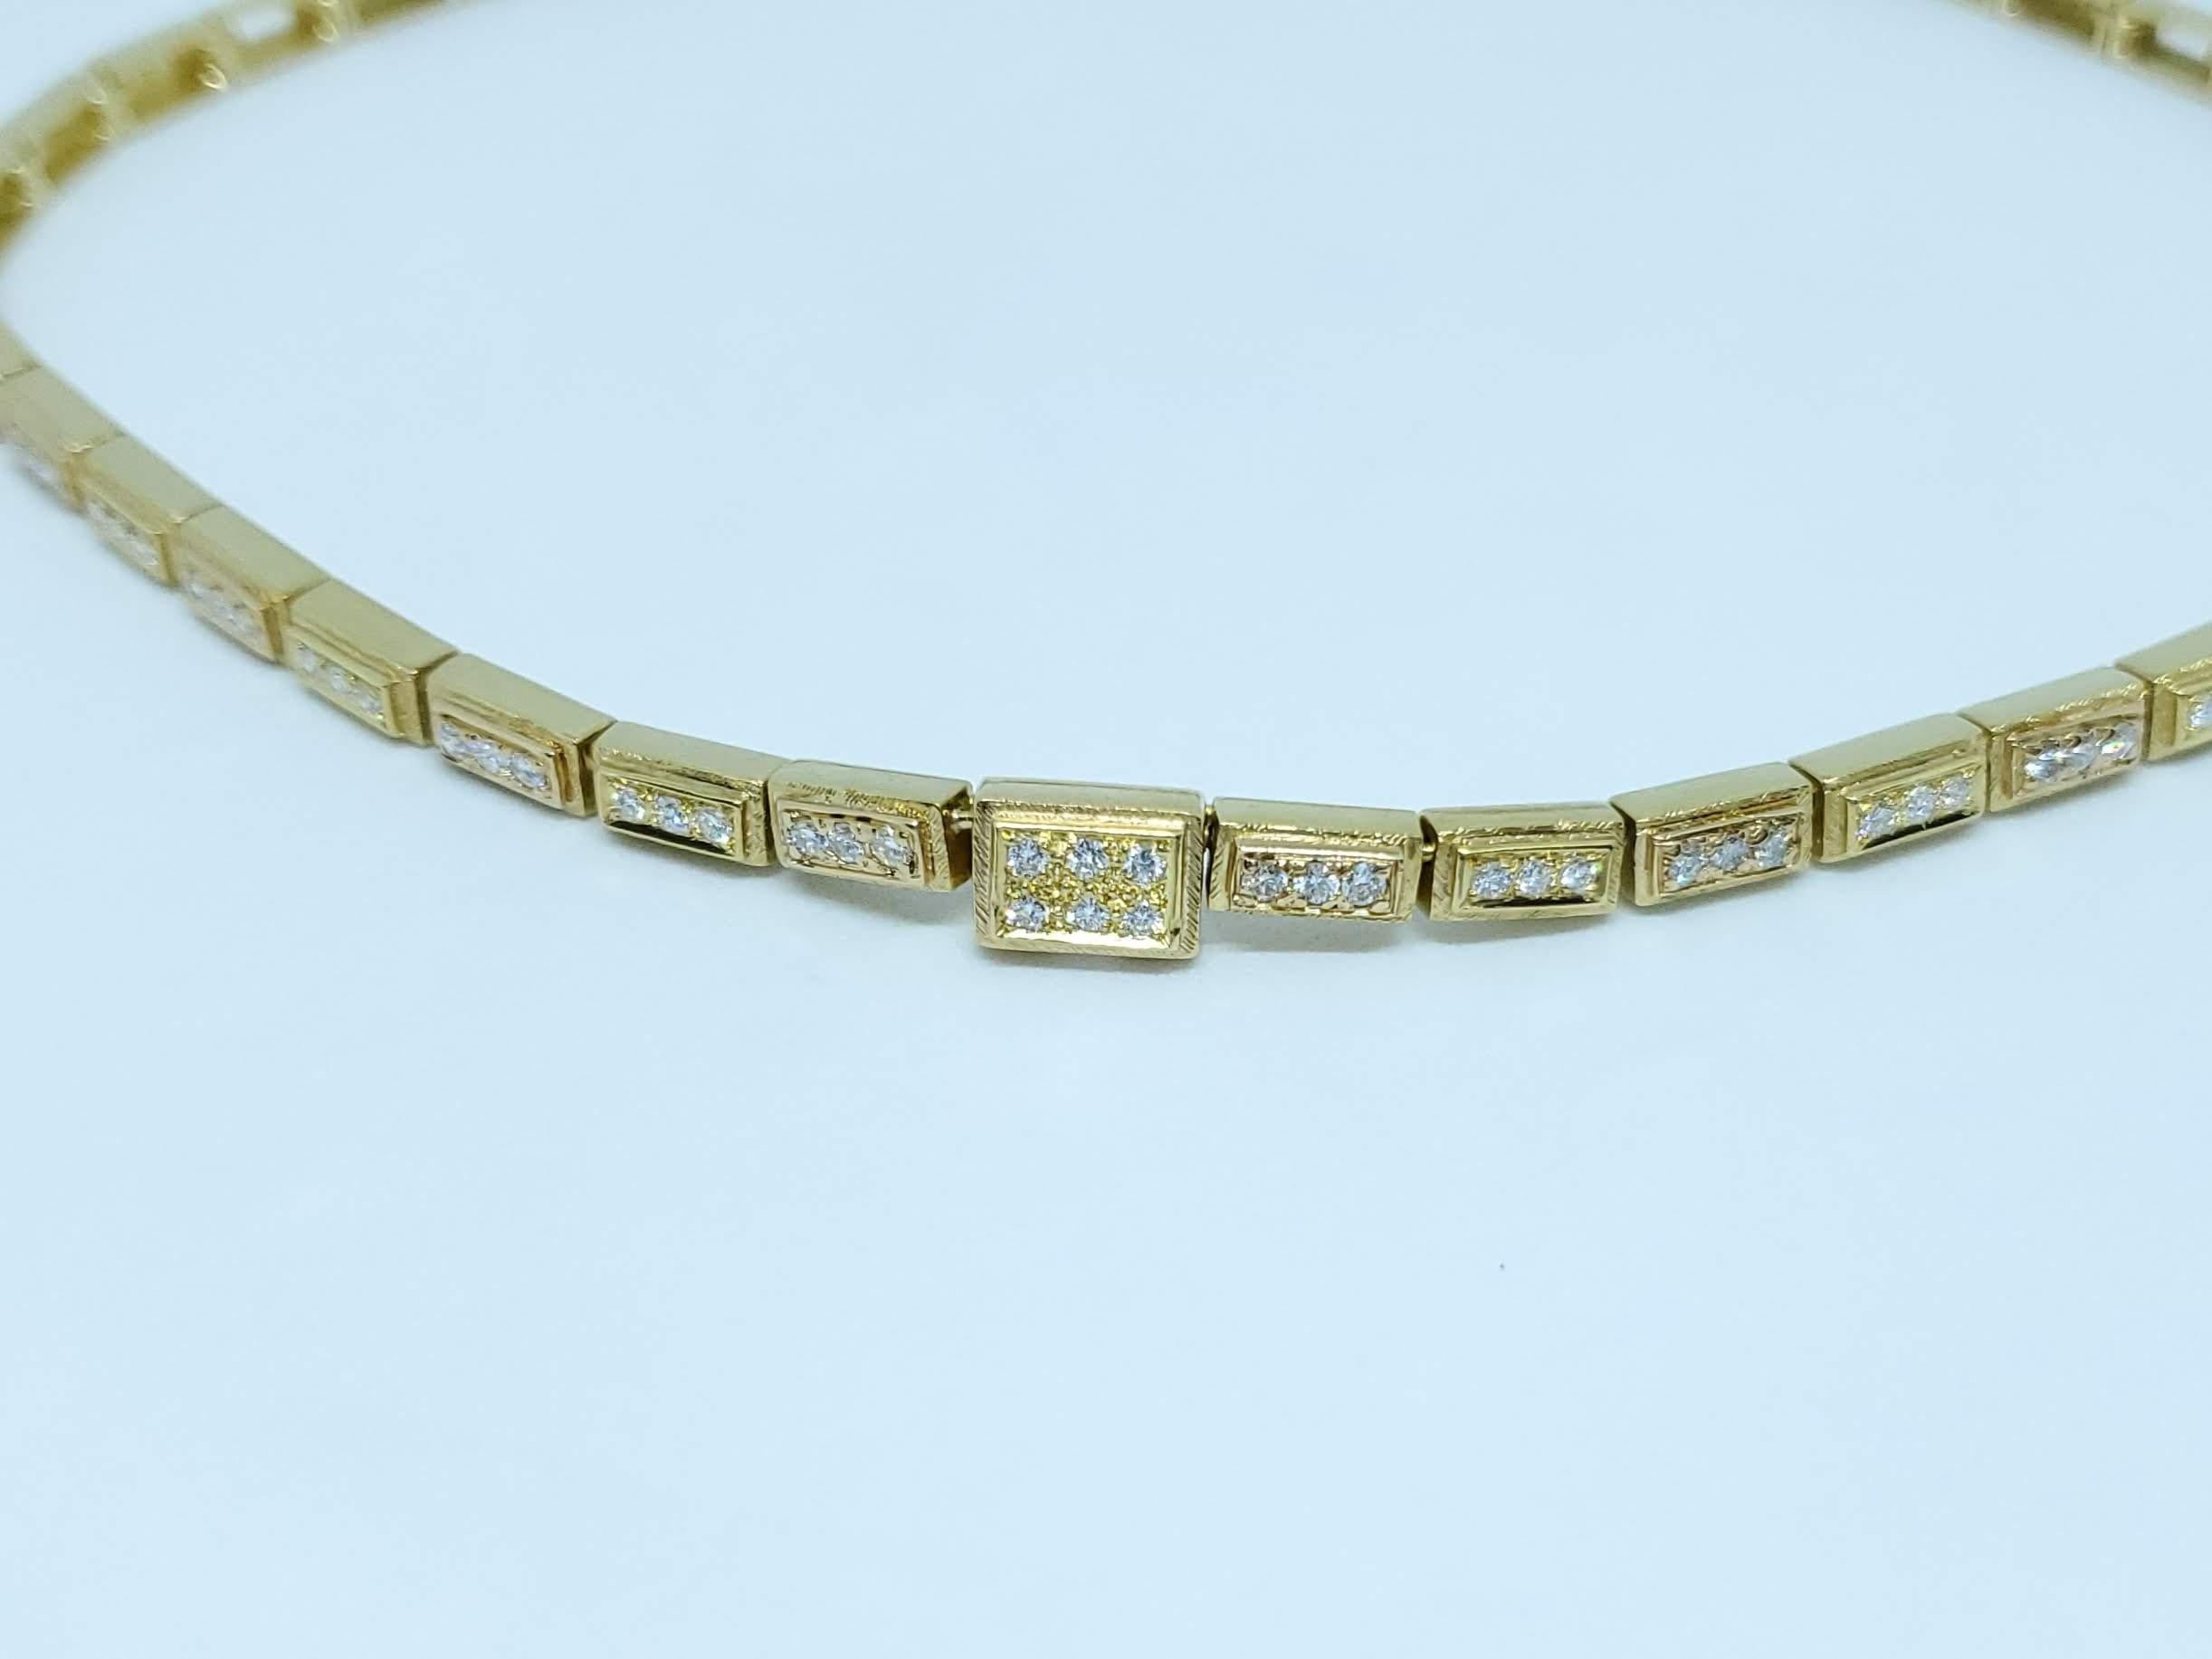 Burle Marx Rare 18 Karat Gold Diamond Neck Collar In Excellent Condition For Sale In Woodway, TX